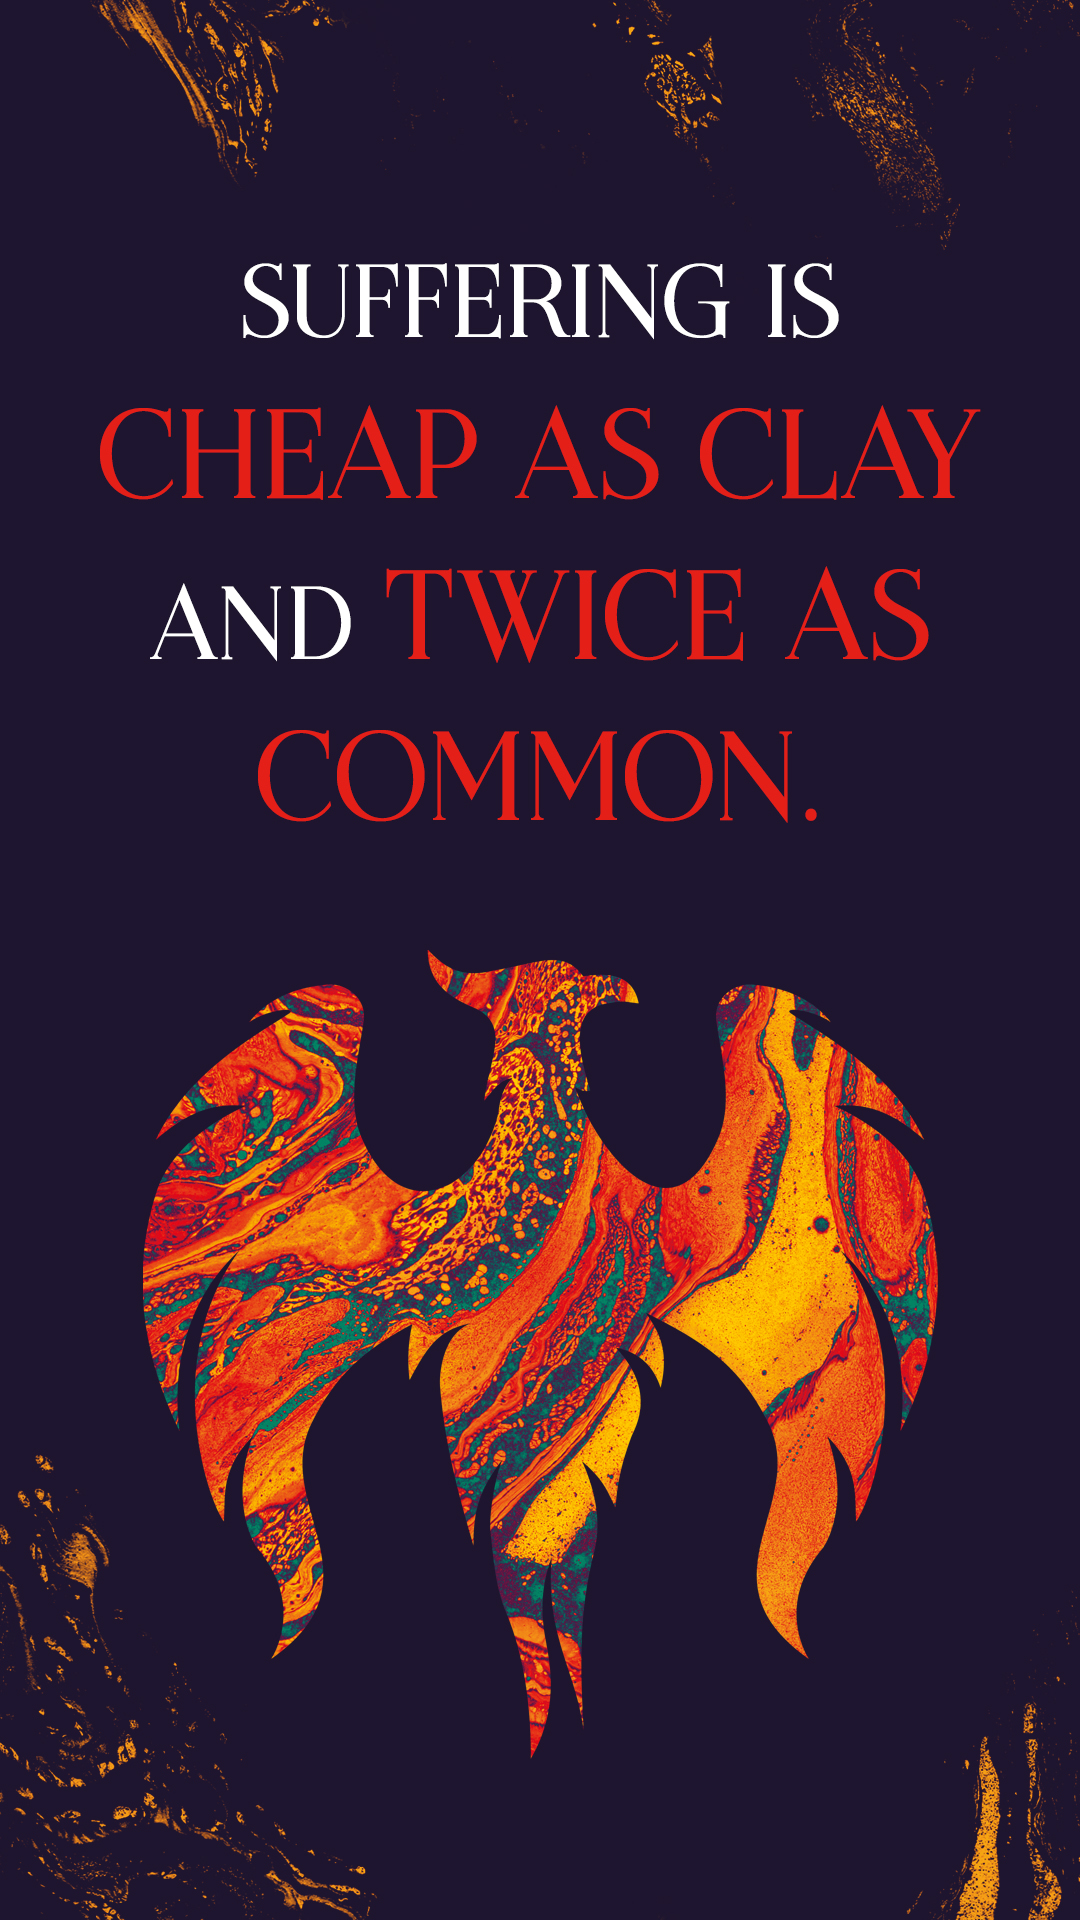 A vibrant poster featuring a colorful, abstract winged creature on a dark, textured background with the quote "suffering is cheap as clay and twice as common.